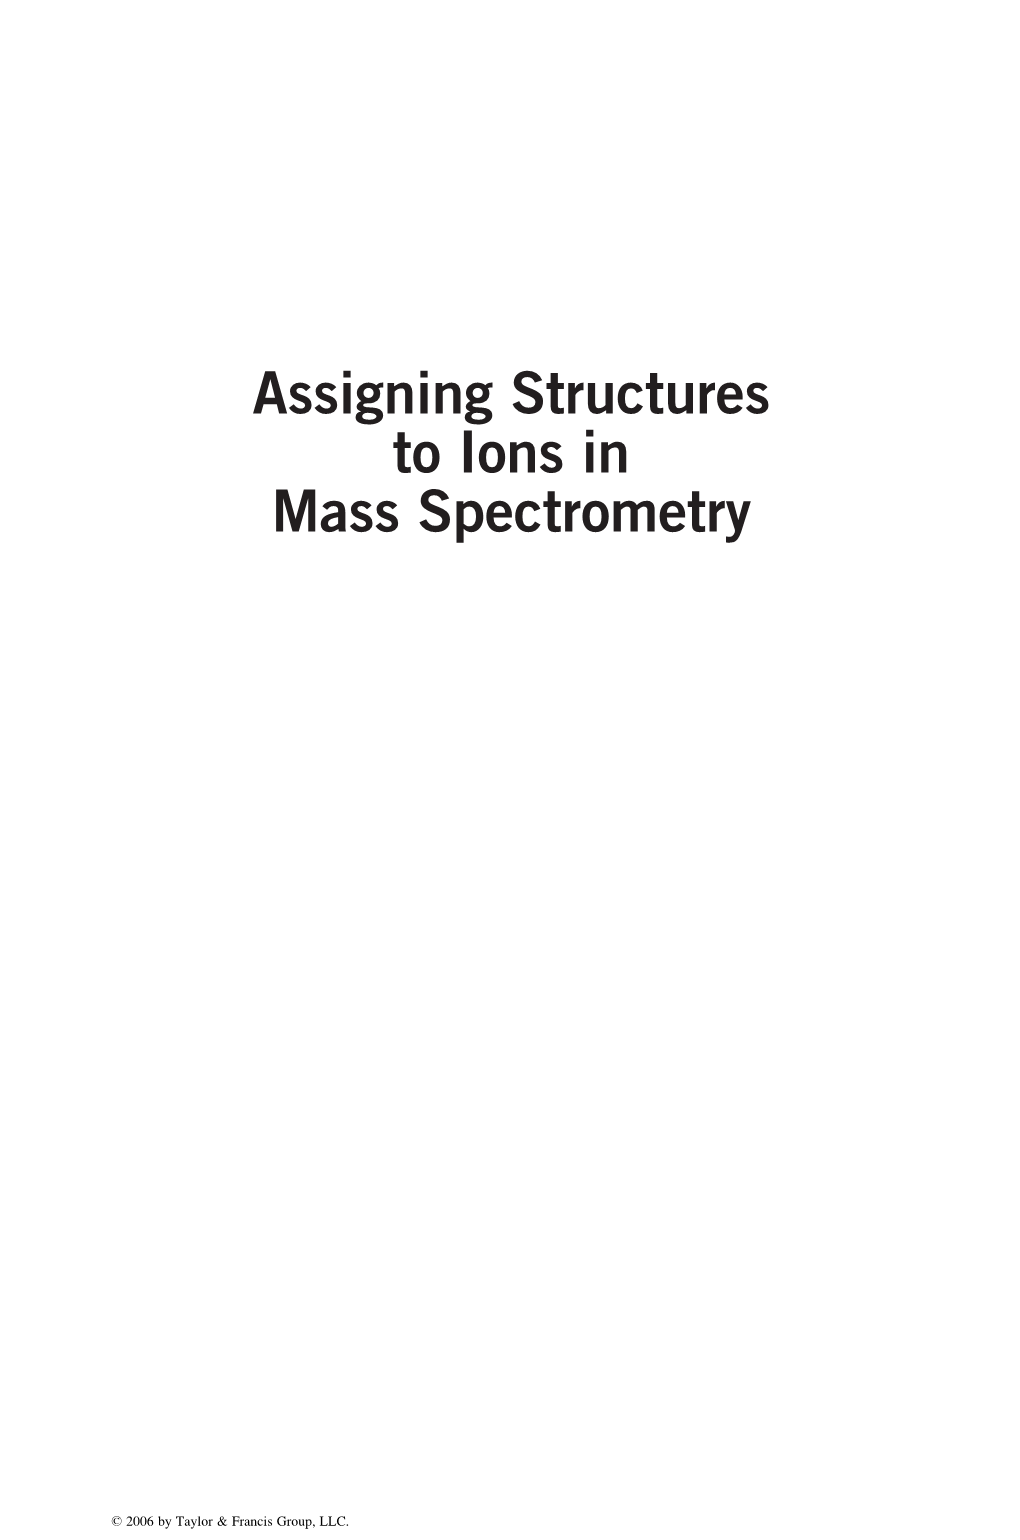 Assigning Structures to Ions in Mass Spectrometry